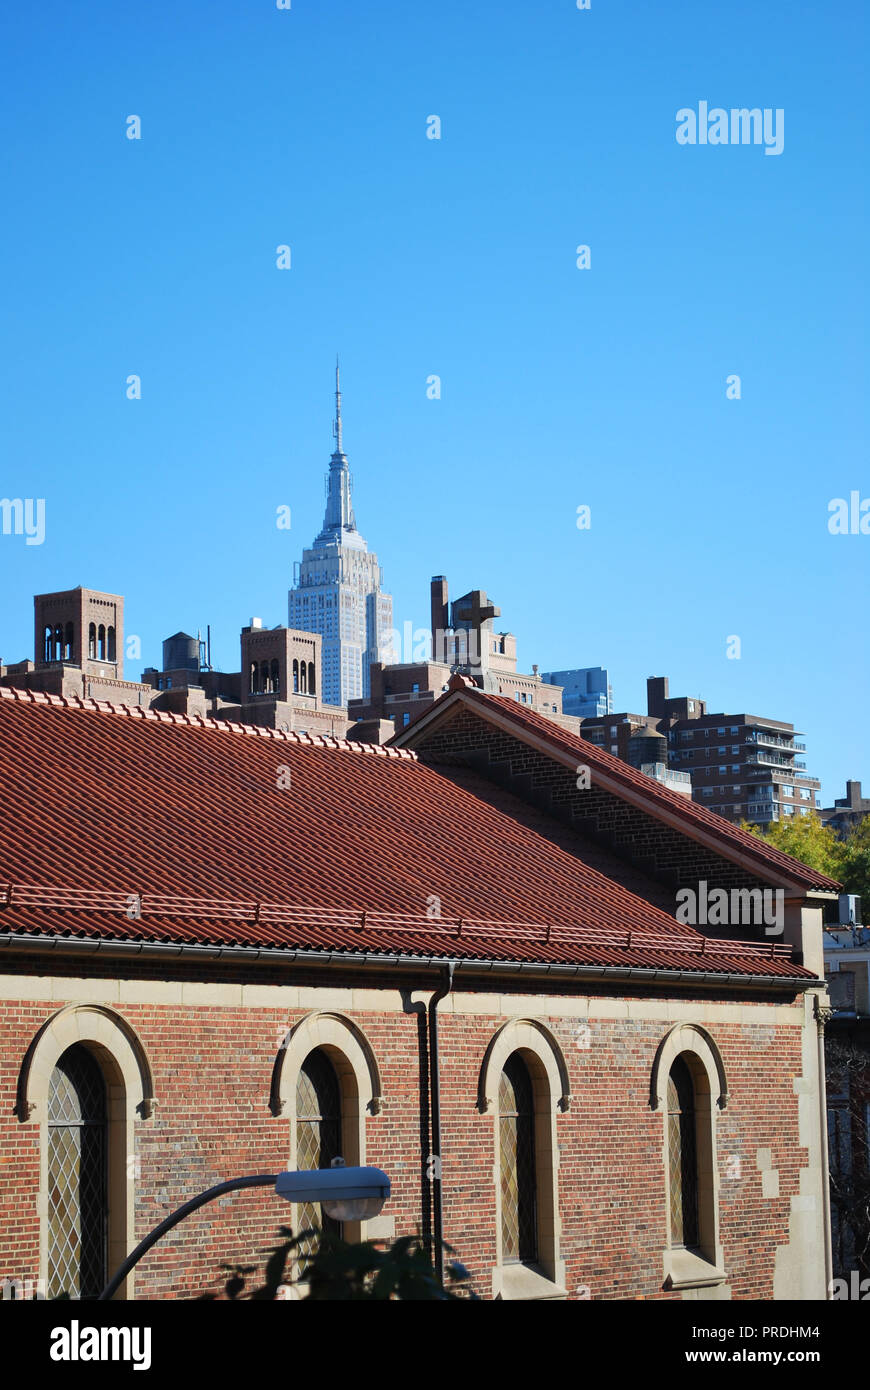 iconic city scape view of manhattan with church in foreground Stock Photo